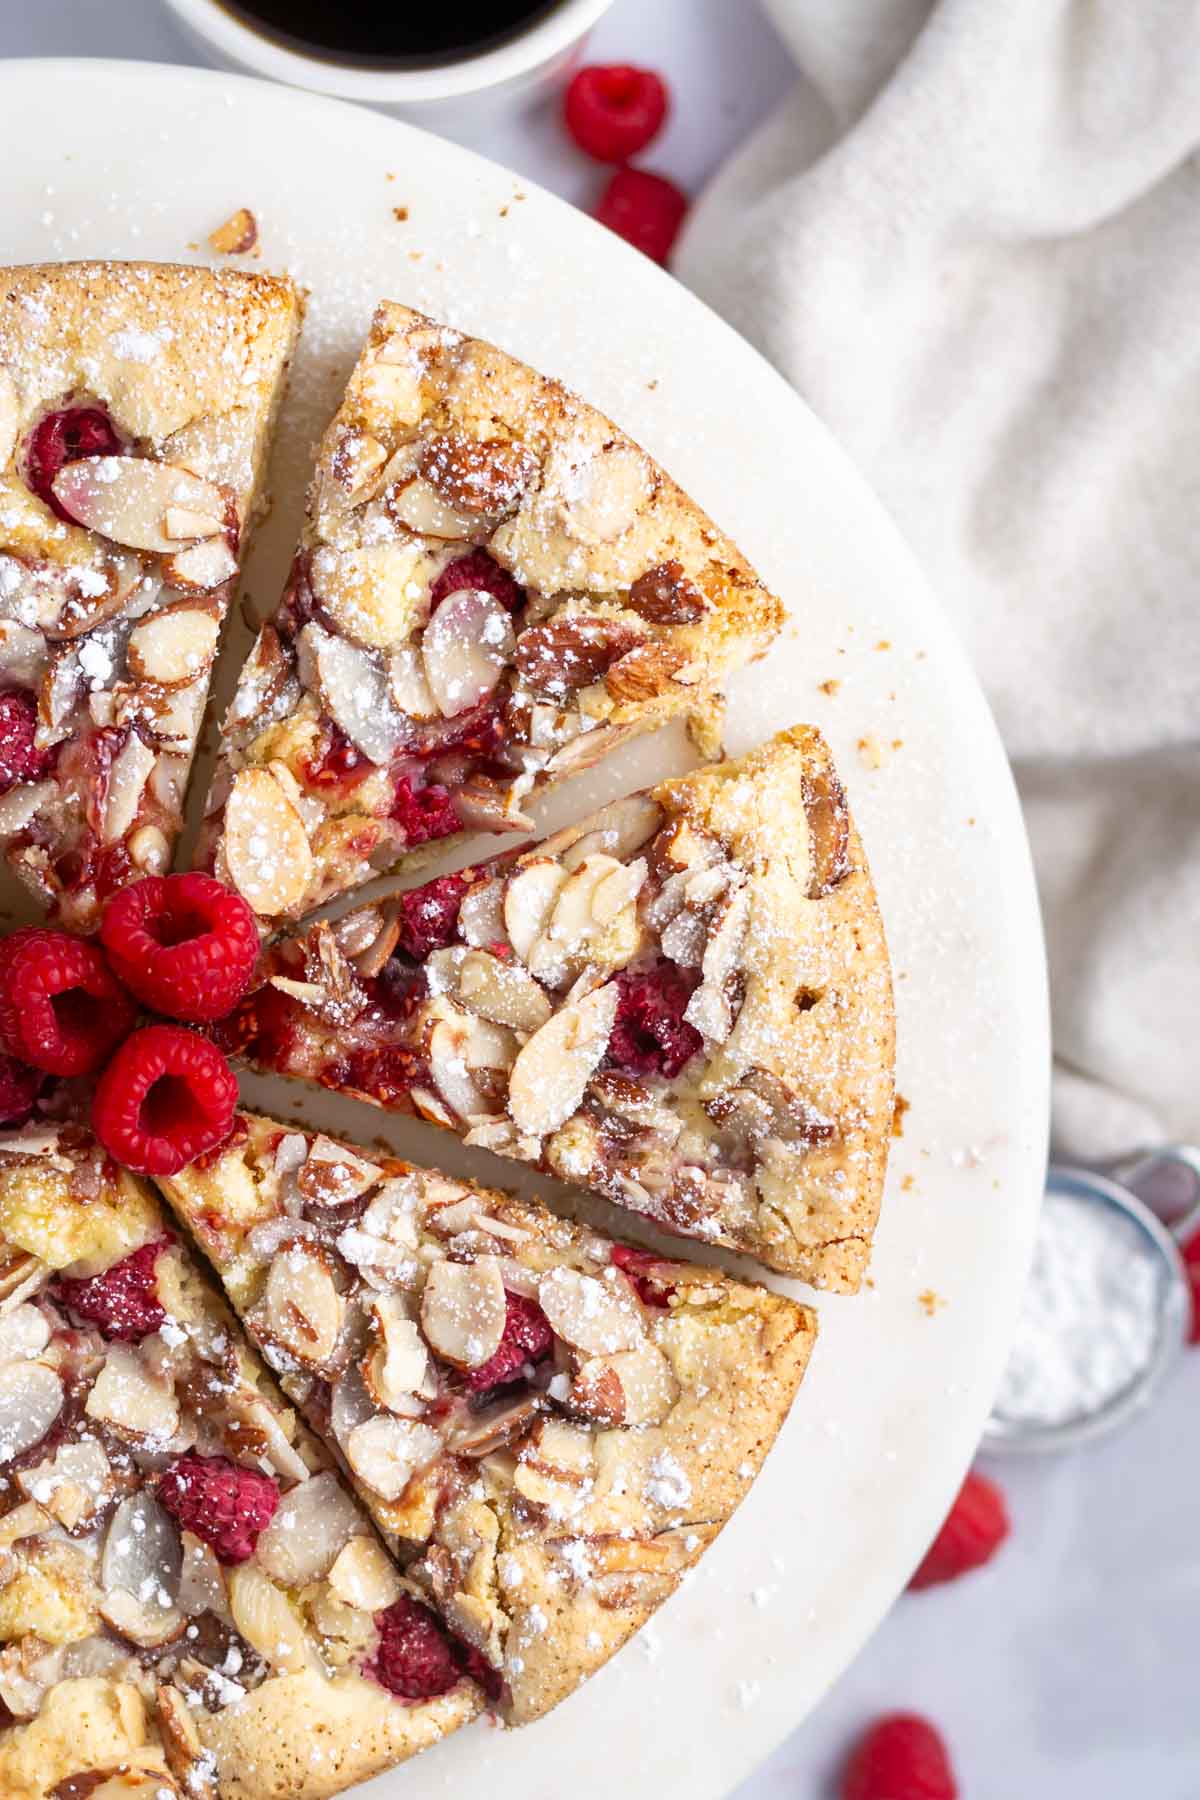 slices of raspberry almond cake on a cake stand